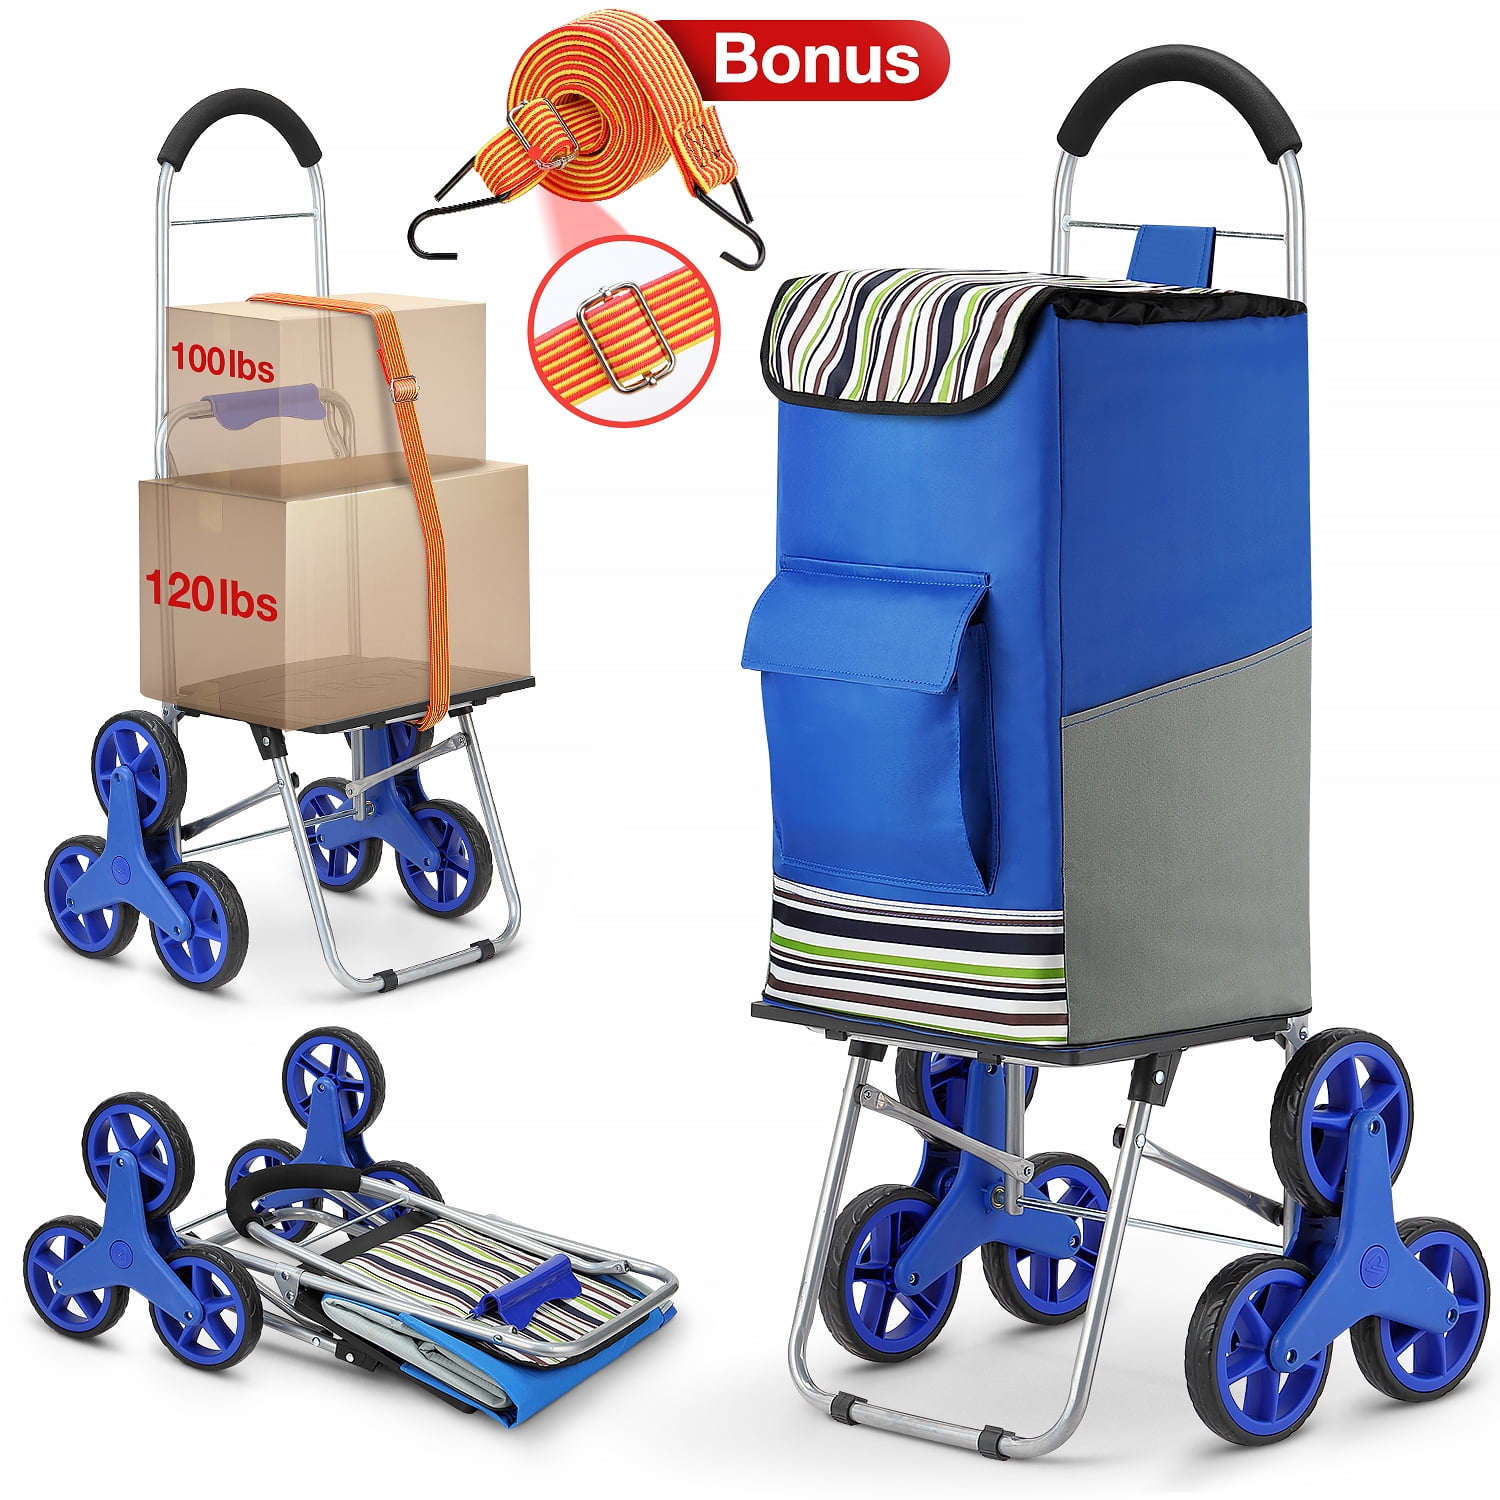 Details about   Home Outdoor Shopping Market Tote Cart Fabric Bag Foldable Frame Storage Fit 